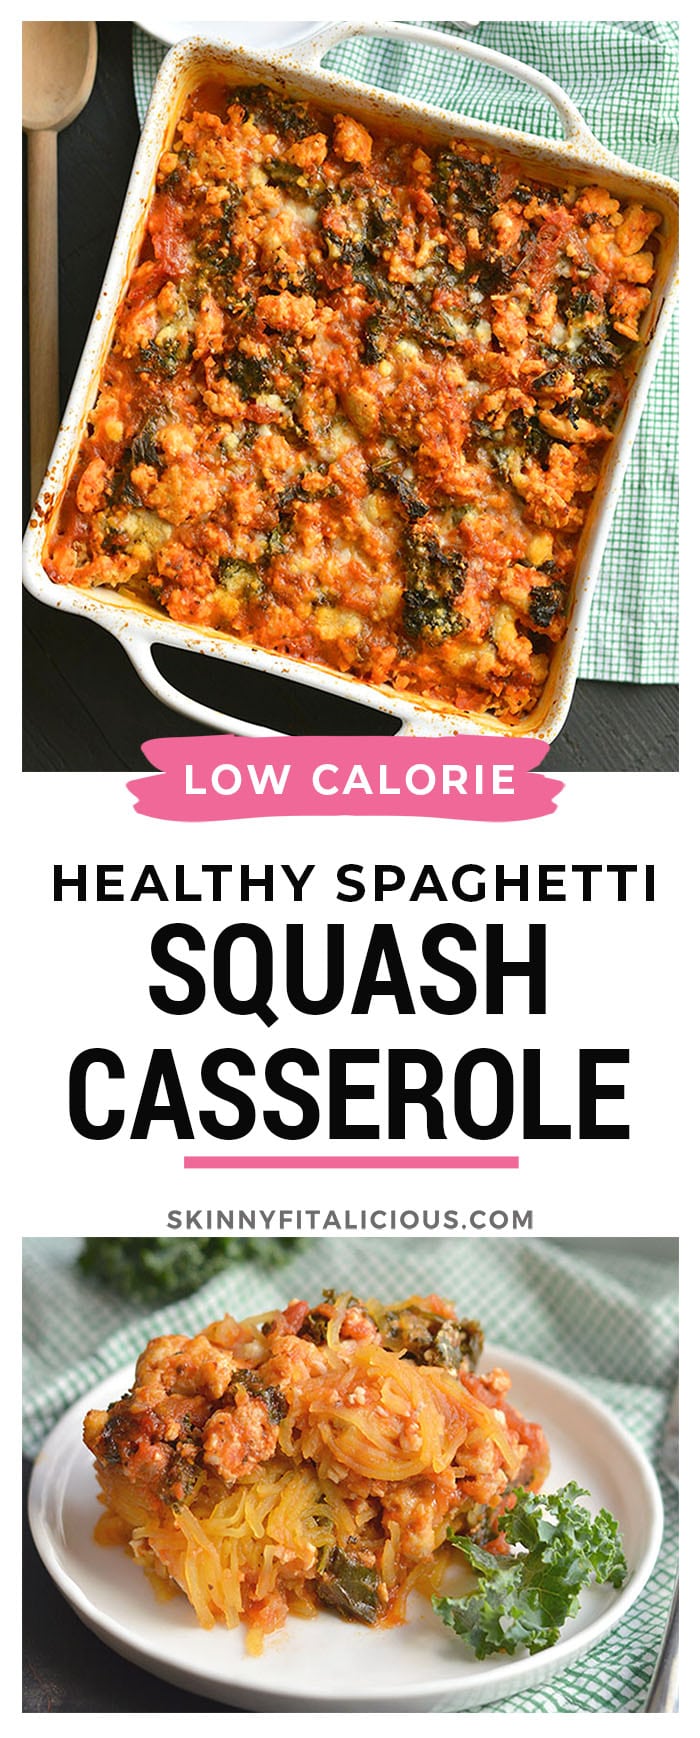 Paleo Spaghetti Squash Lasagna! A healthy casserole perfect for a make ahead meal. Easy to make, packed with protein, feeds a crowd and is freezer friendly!